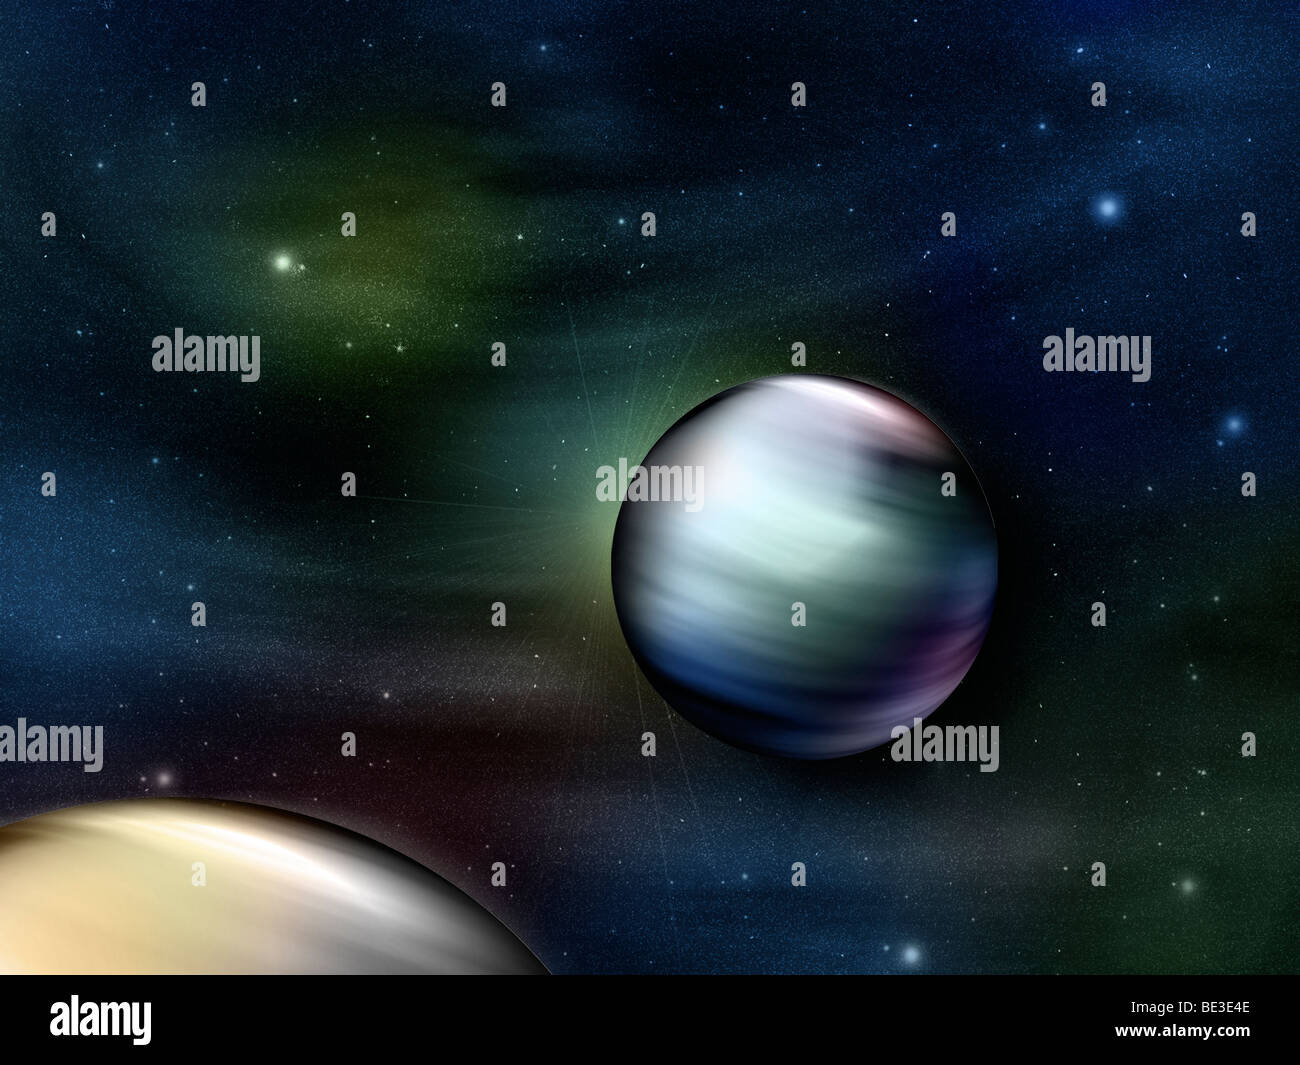 Illustration of planets in outer space. Stock Photo